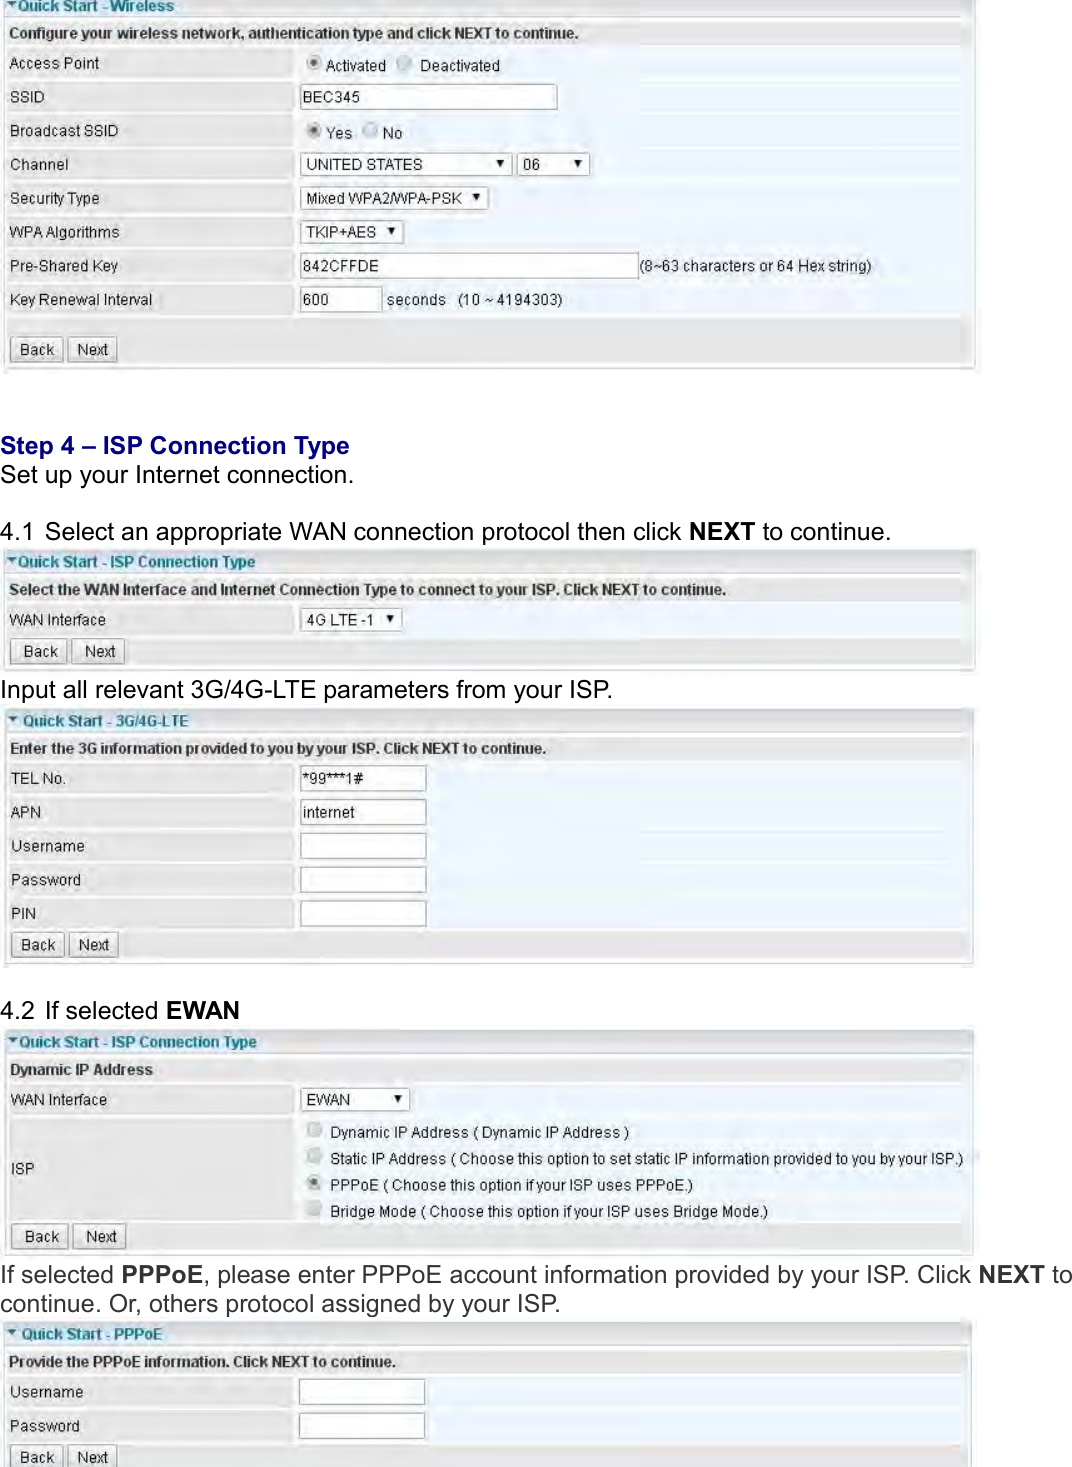      Step 4 – ISP Connection Type  Set up your Internet connection.   4.1  Select an appropriate WAN connection protocol then click NEXT to continue.   Input all relevant 3G/4G-LTE parameters from your ISP.   4.2  If selected EWAN  If selected PPPoE, please enter PPPoE account information provided by your ISP. Click NEXT to continue. Or, others protocol assigned by your ISP.   